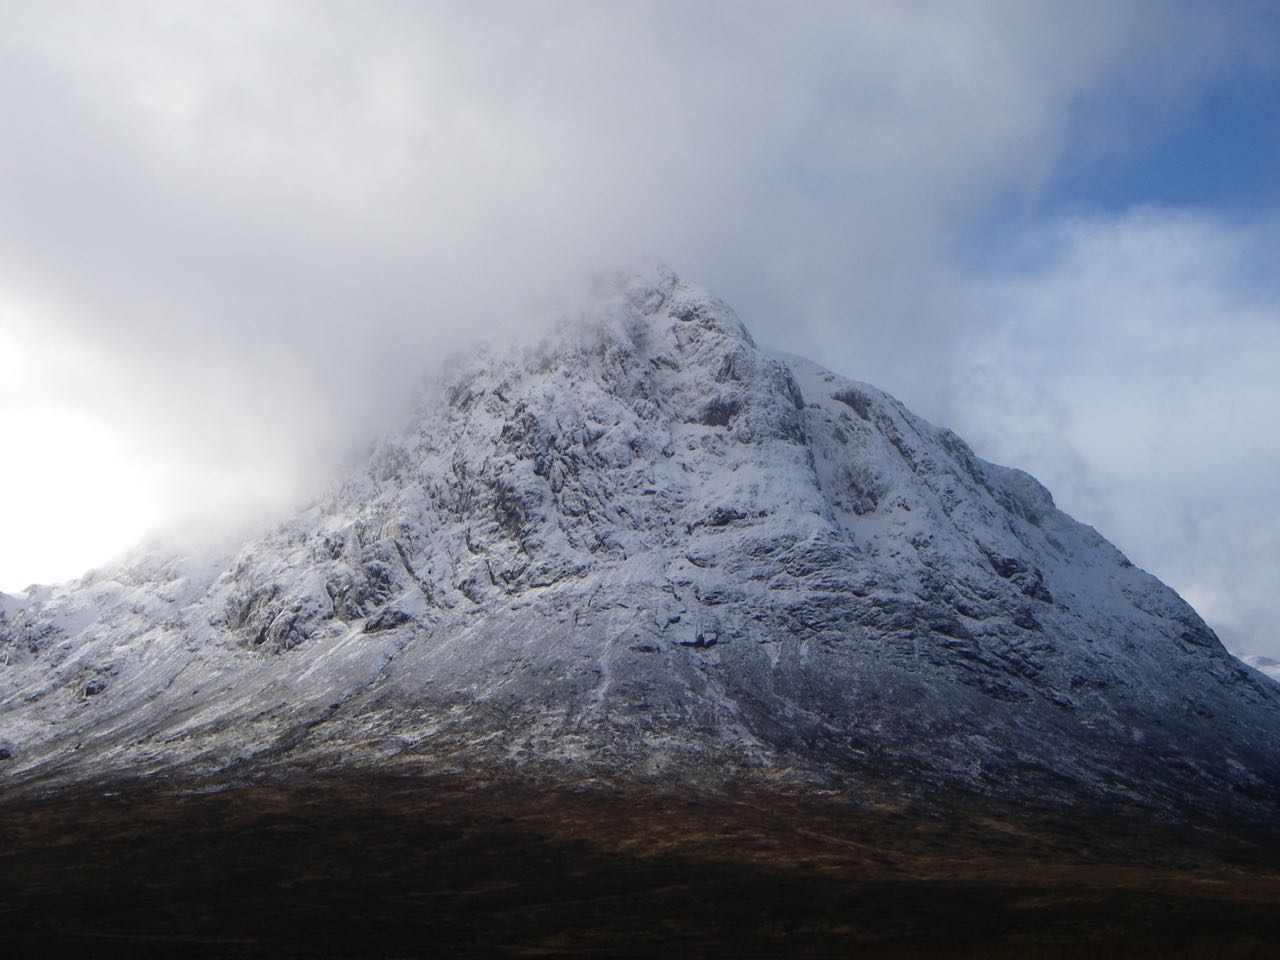 Mist clearing from round the summit of the Buachaille at mid-day